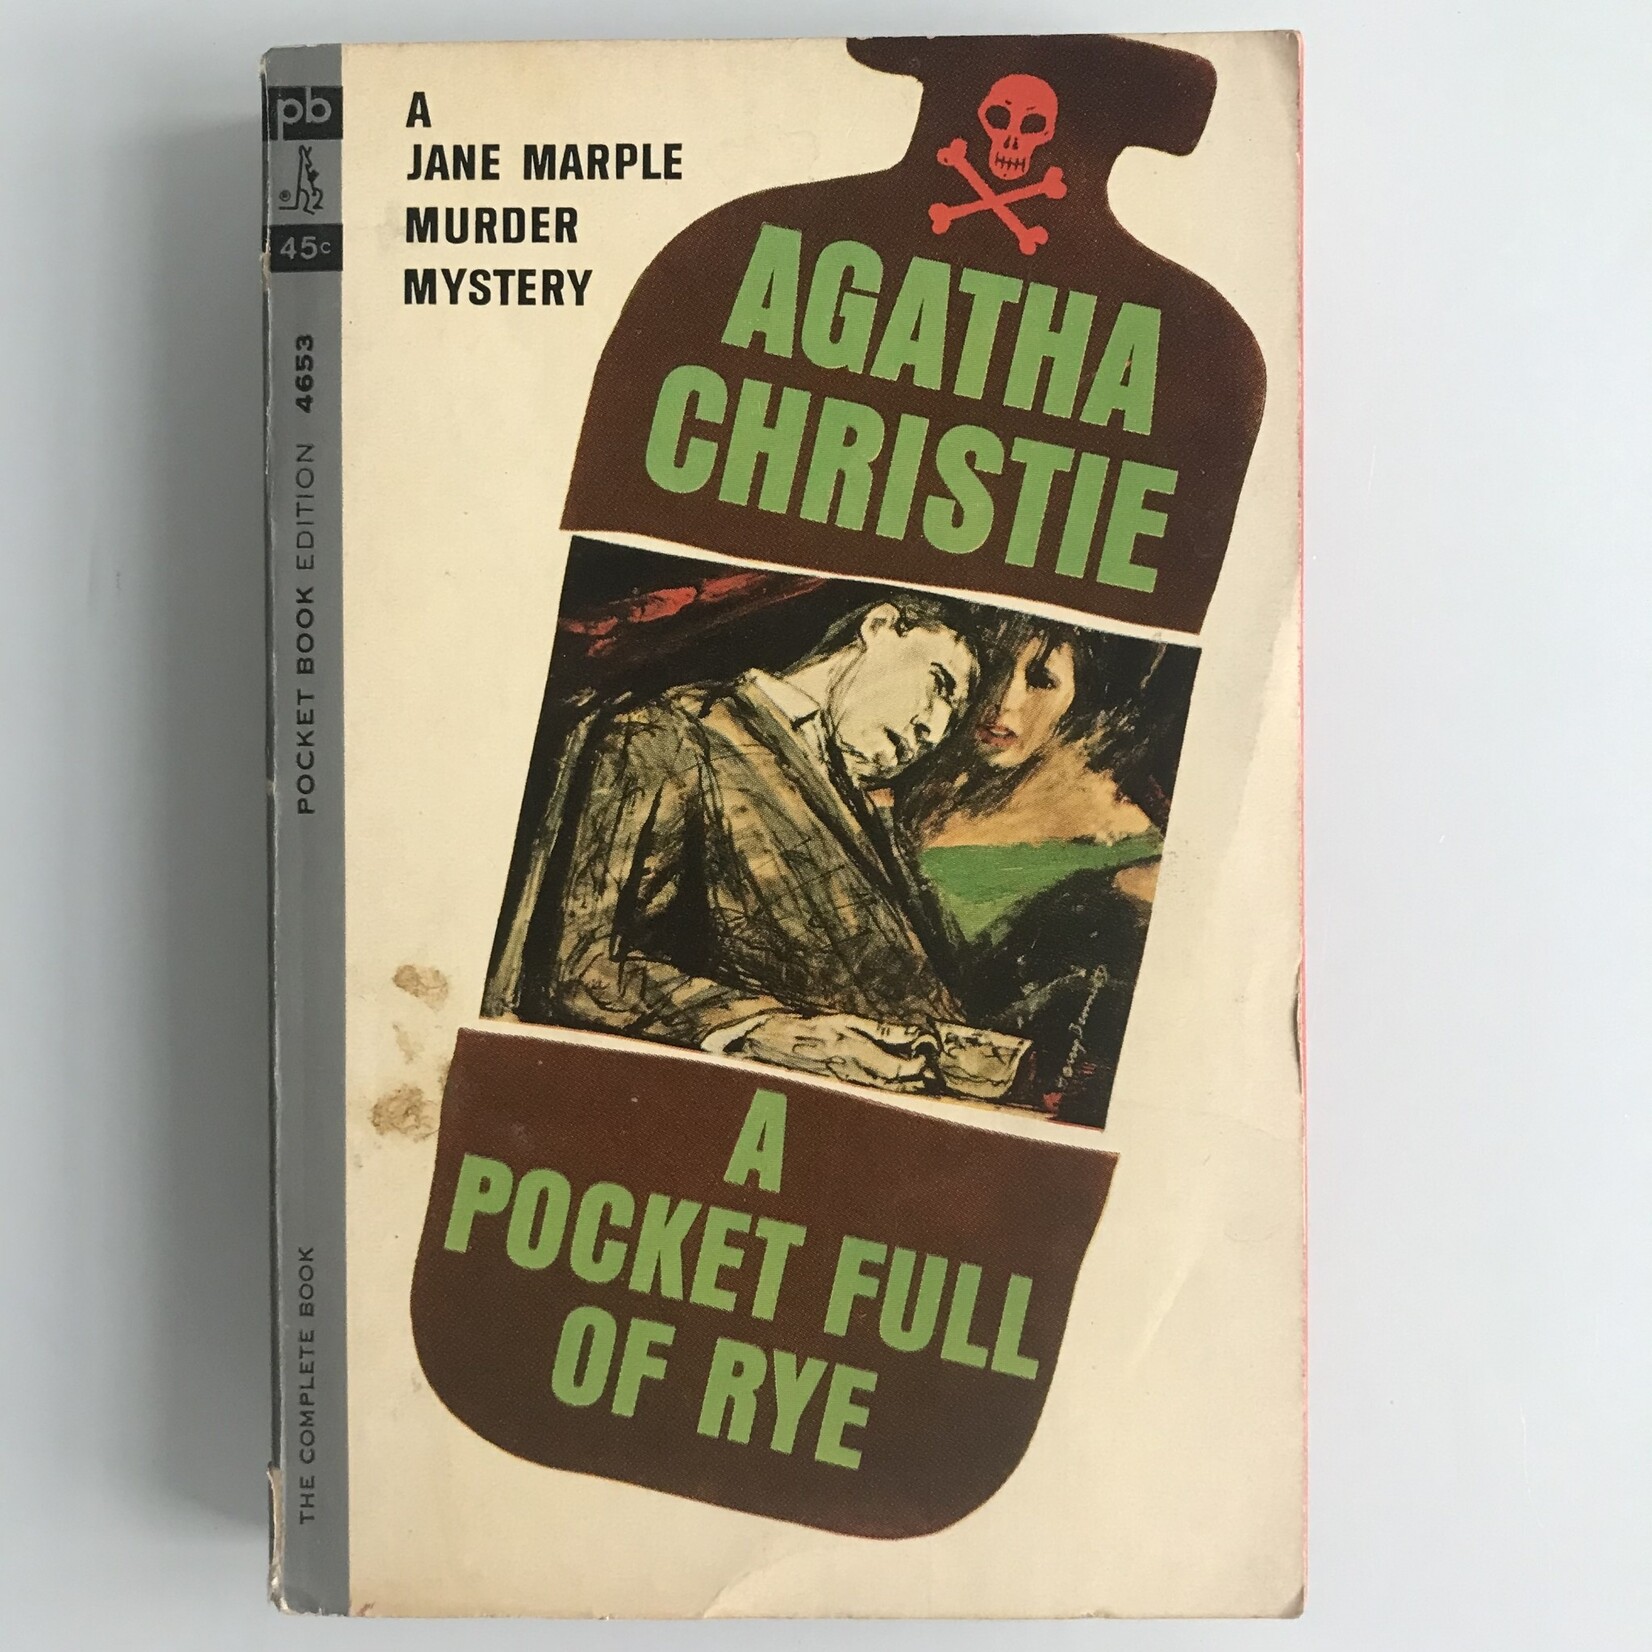 Agatha Christie - A Pocket Full Of Rye (Silver Pocket Book Edition) - Paperback (USED - G)